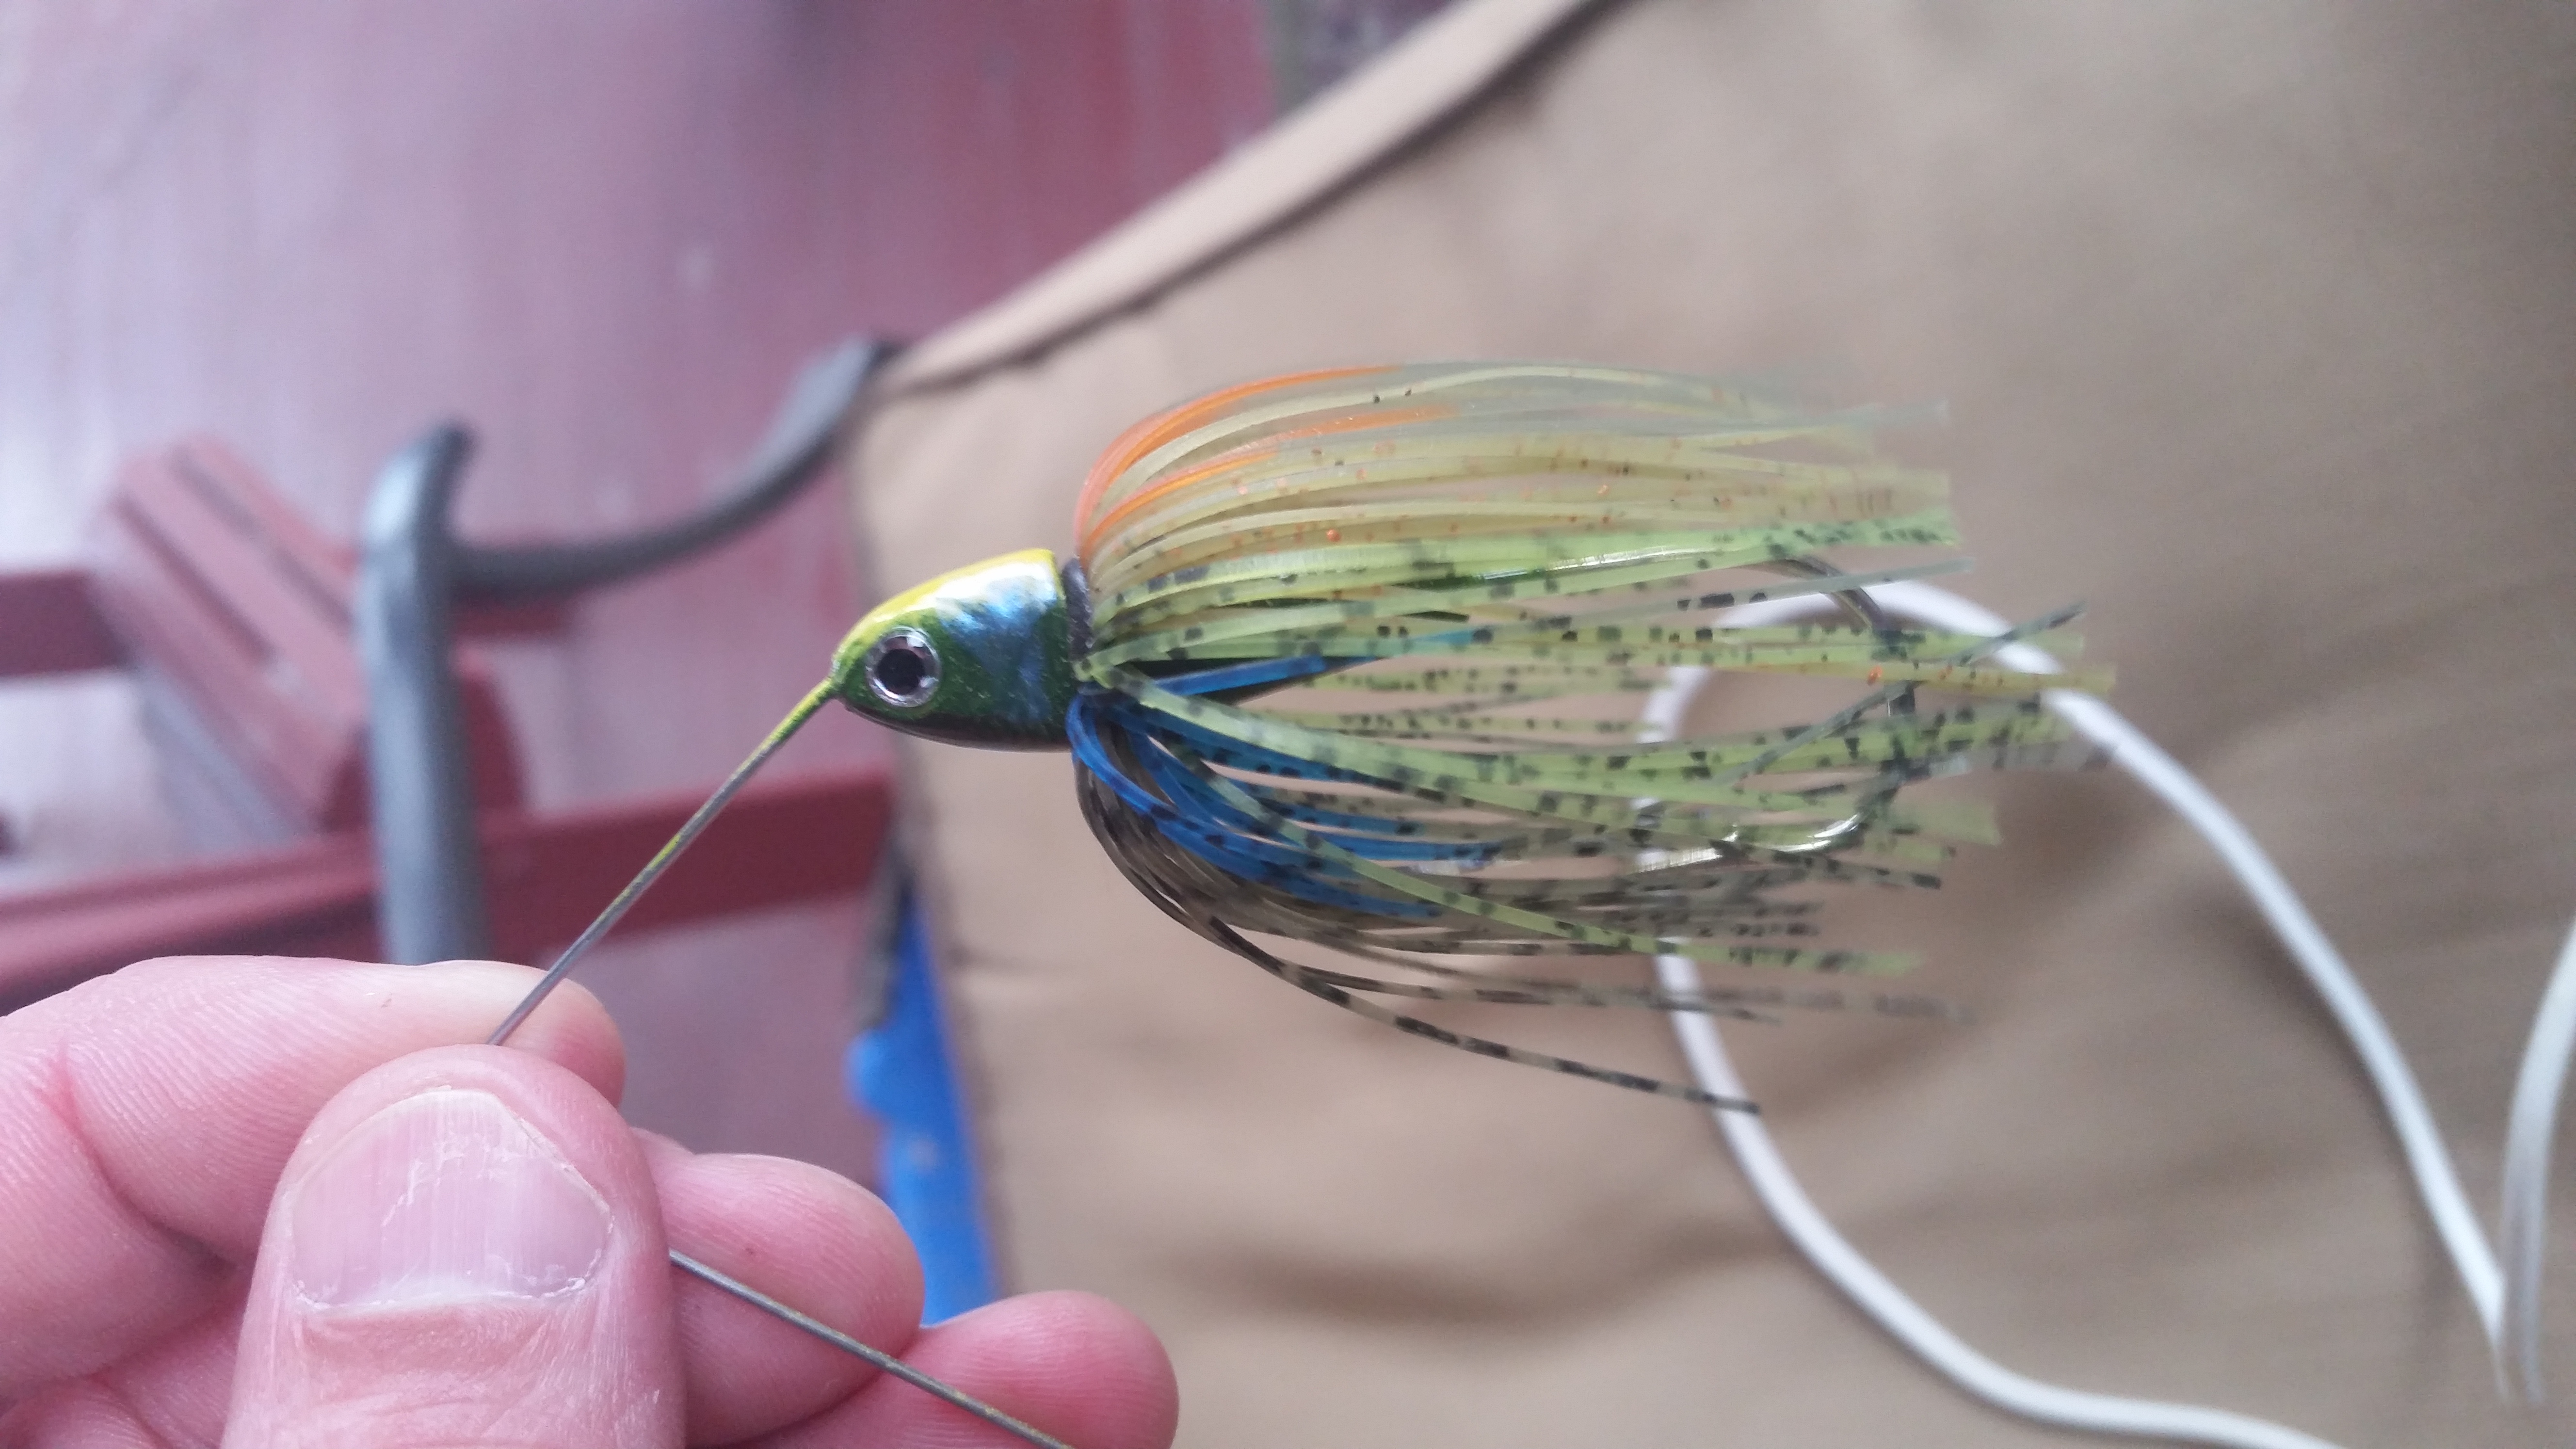 Favorite bluegill color spinnerbait? - Fishing Tackle - Bass